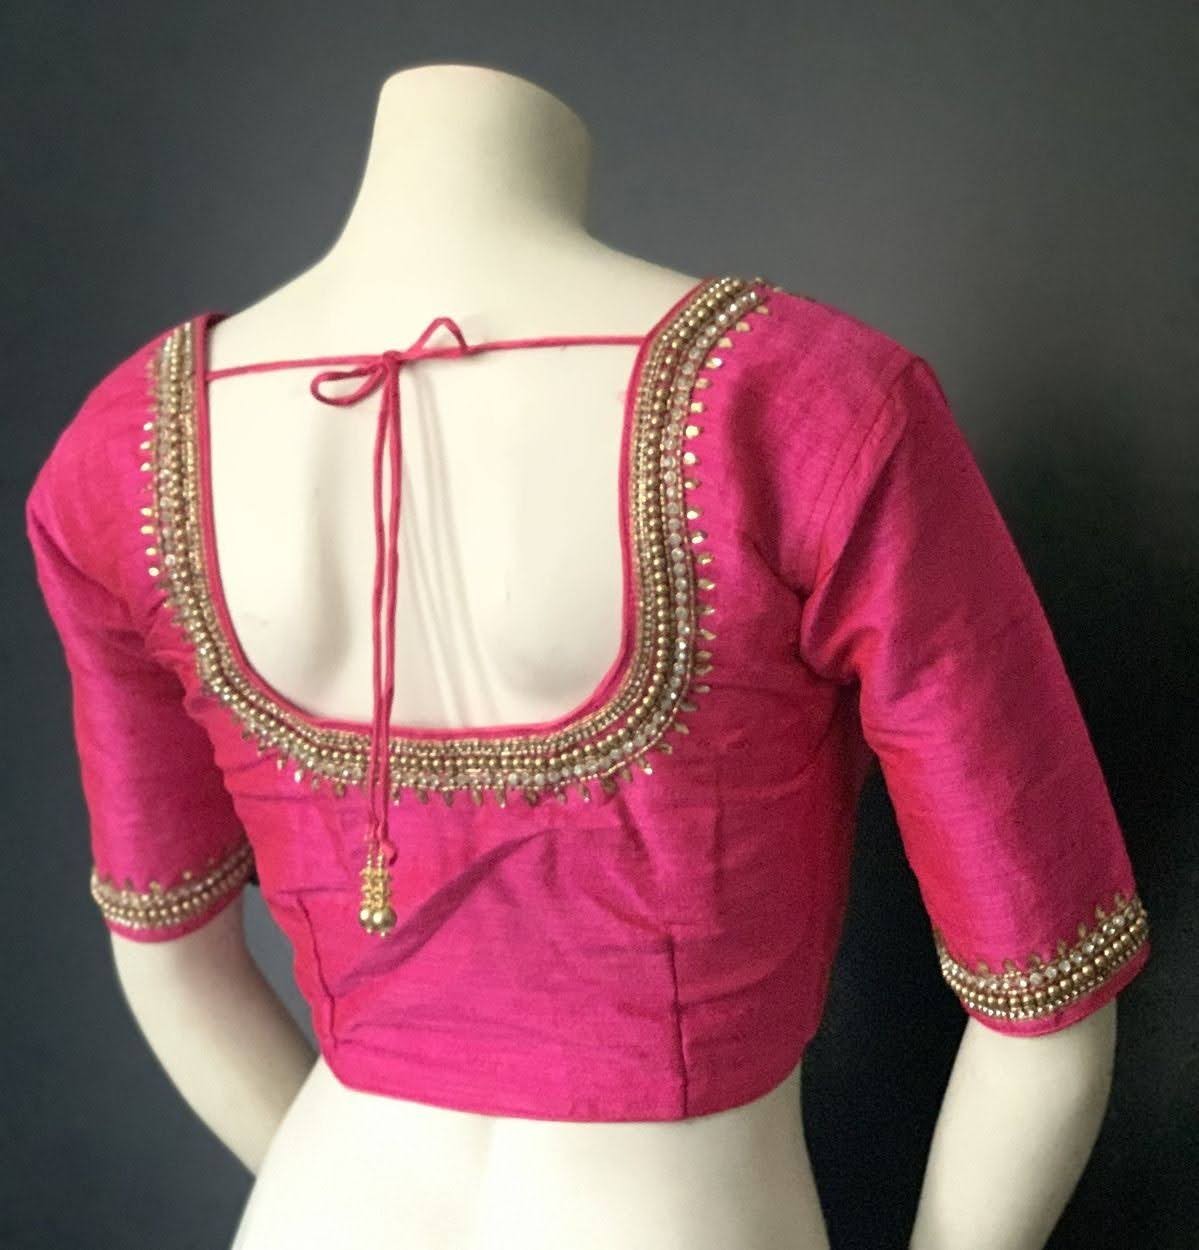 The Ultimate Collection of 999+ Stunning Maggam Work Blouse Images in ...